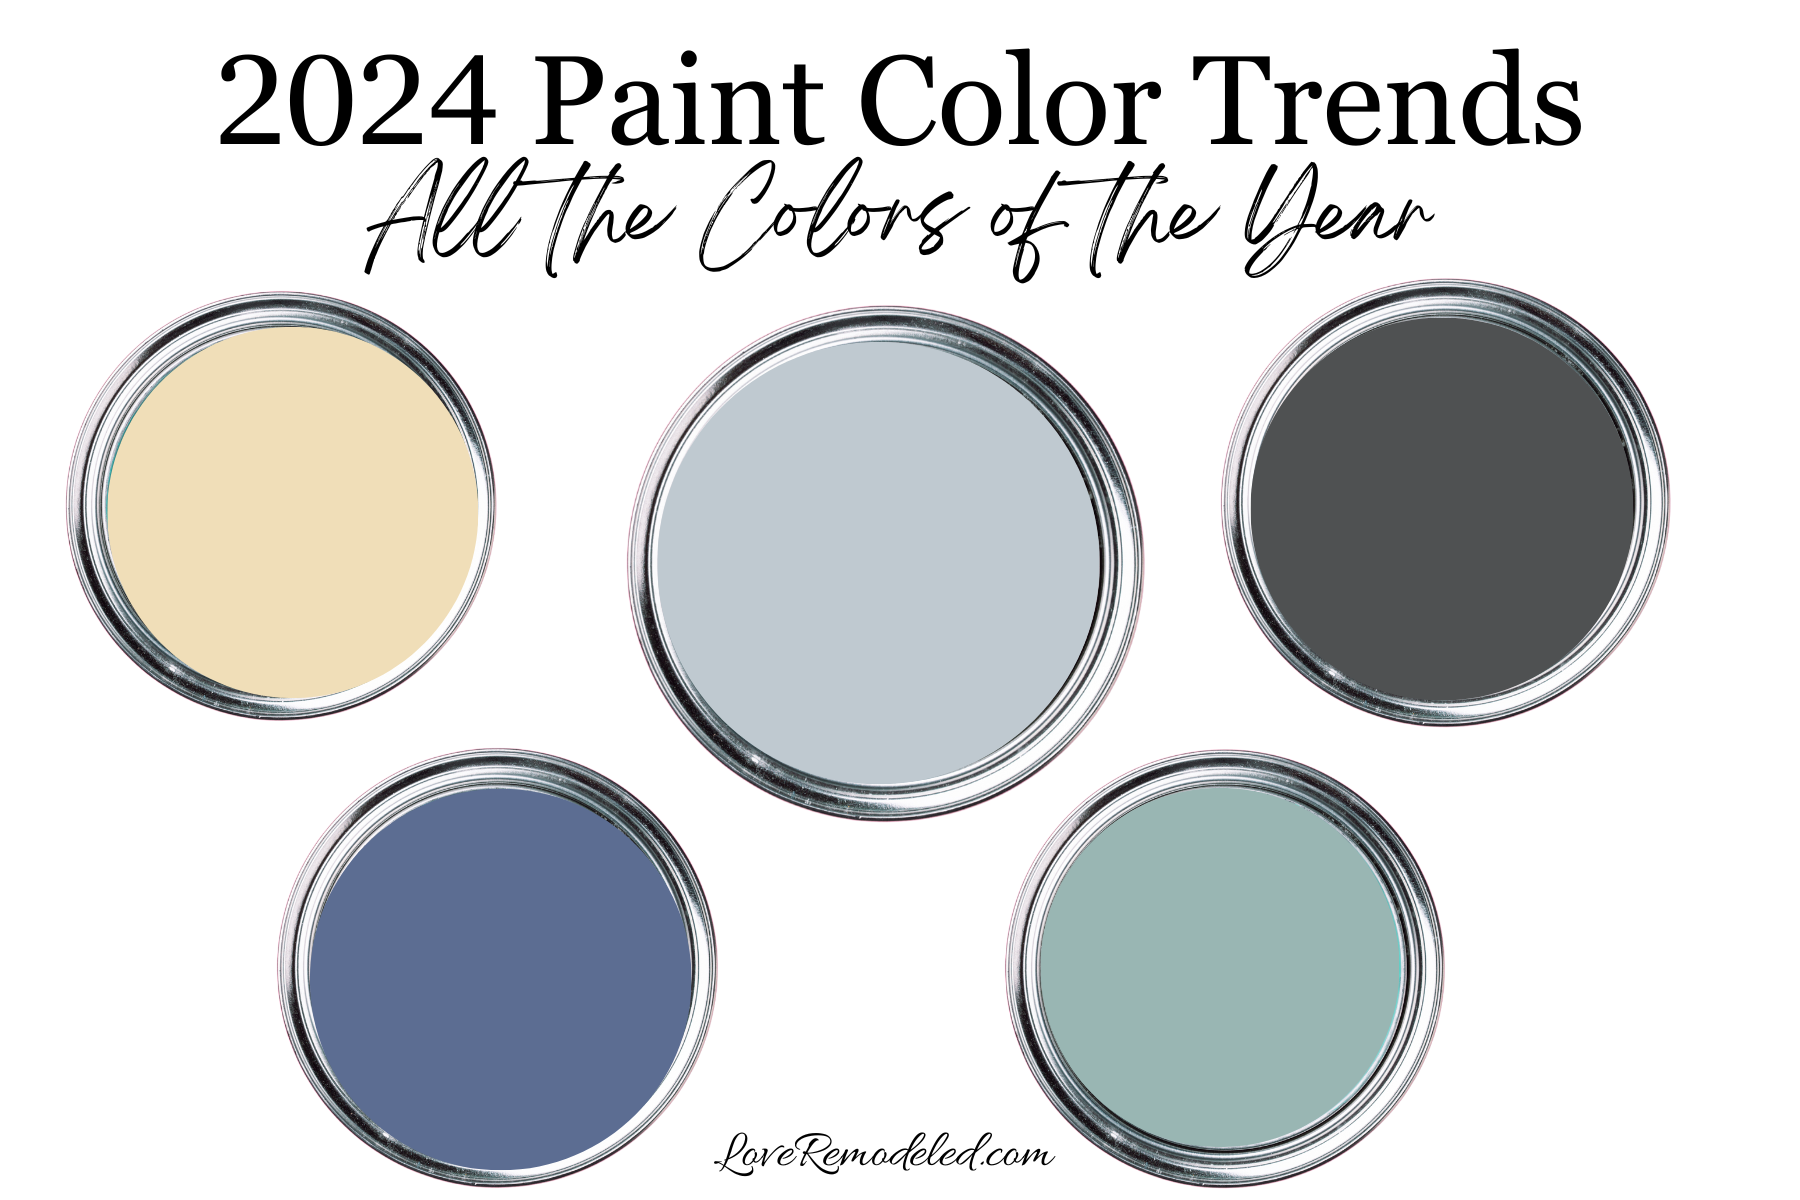 2024 Paint Color Trends - All the 2024 Colors of the Year